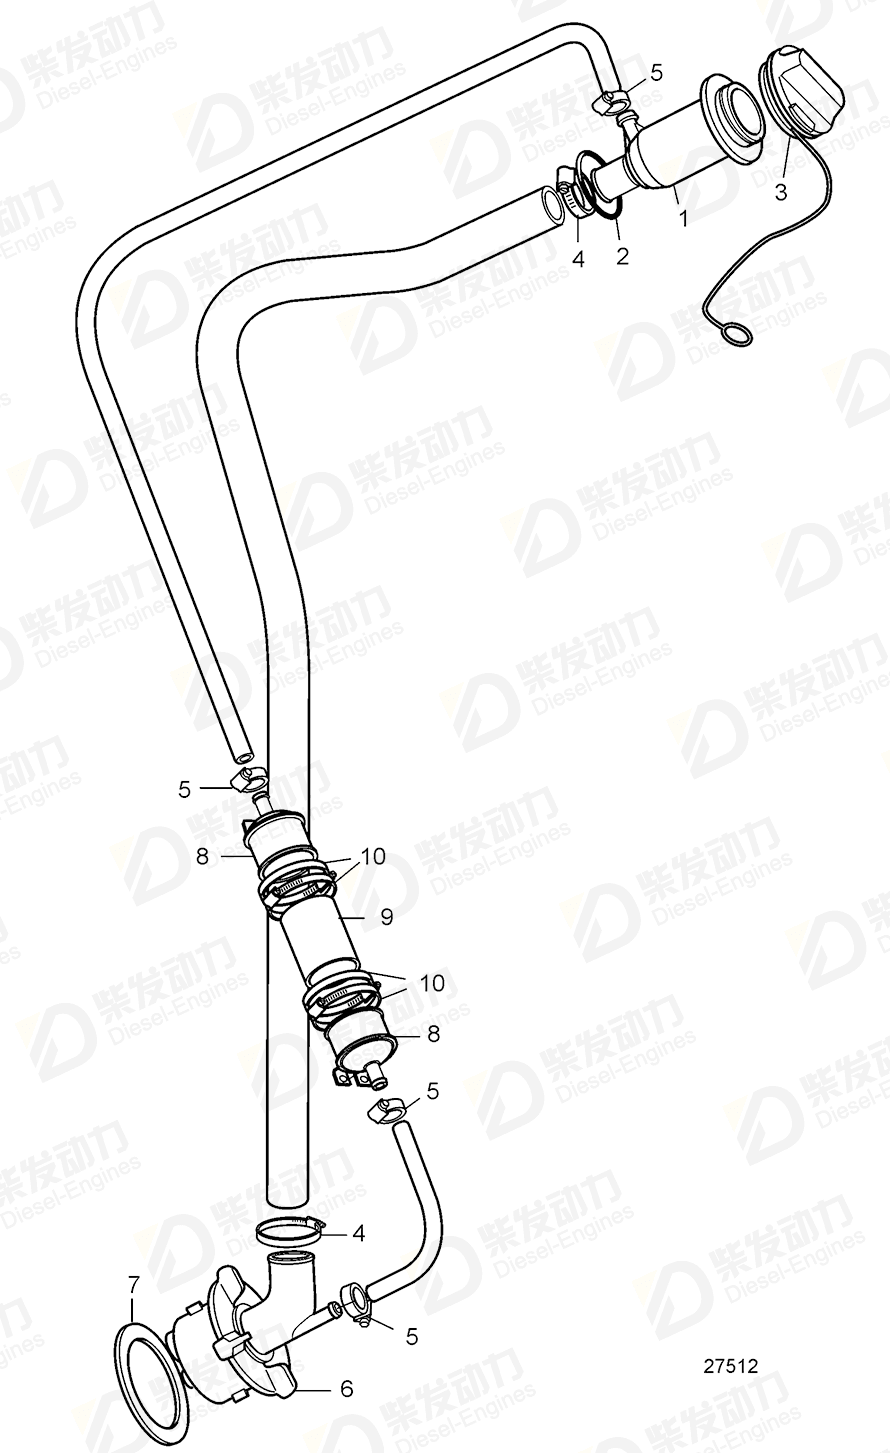 VOLVO Hose clamp 992081 Drawing